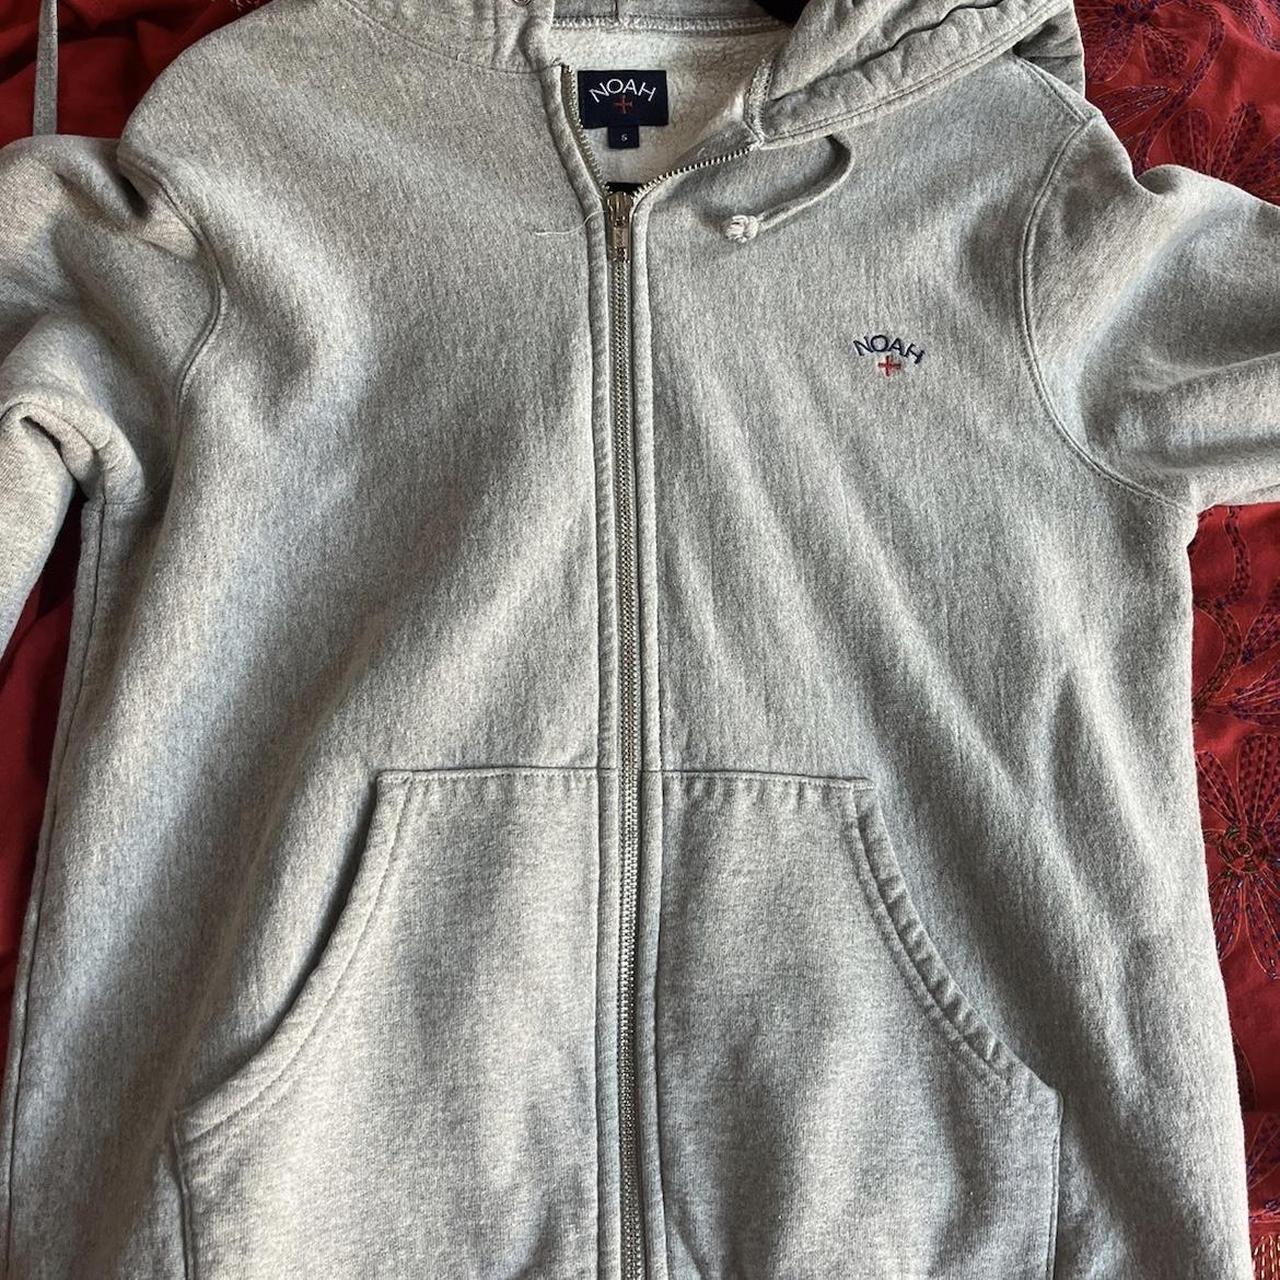 Noah zip up hoodie bought in NYC flagship store...